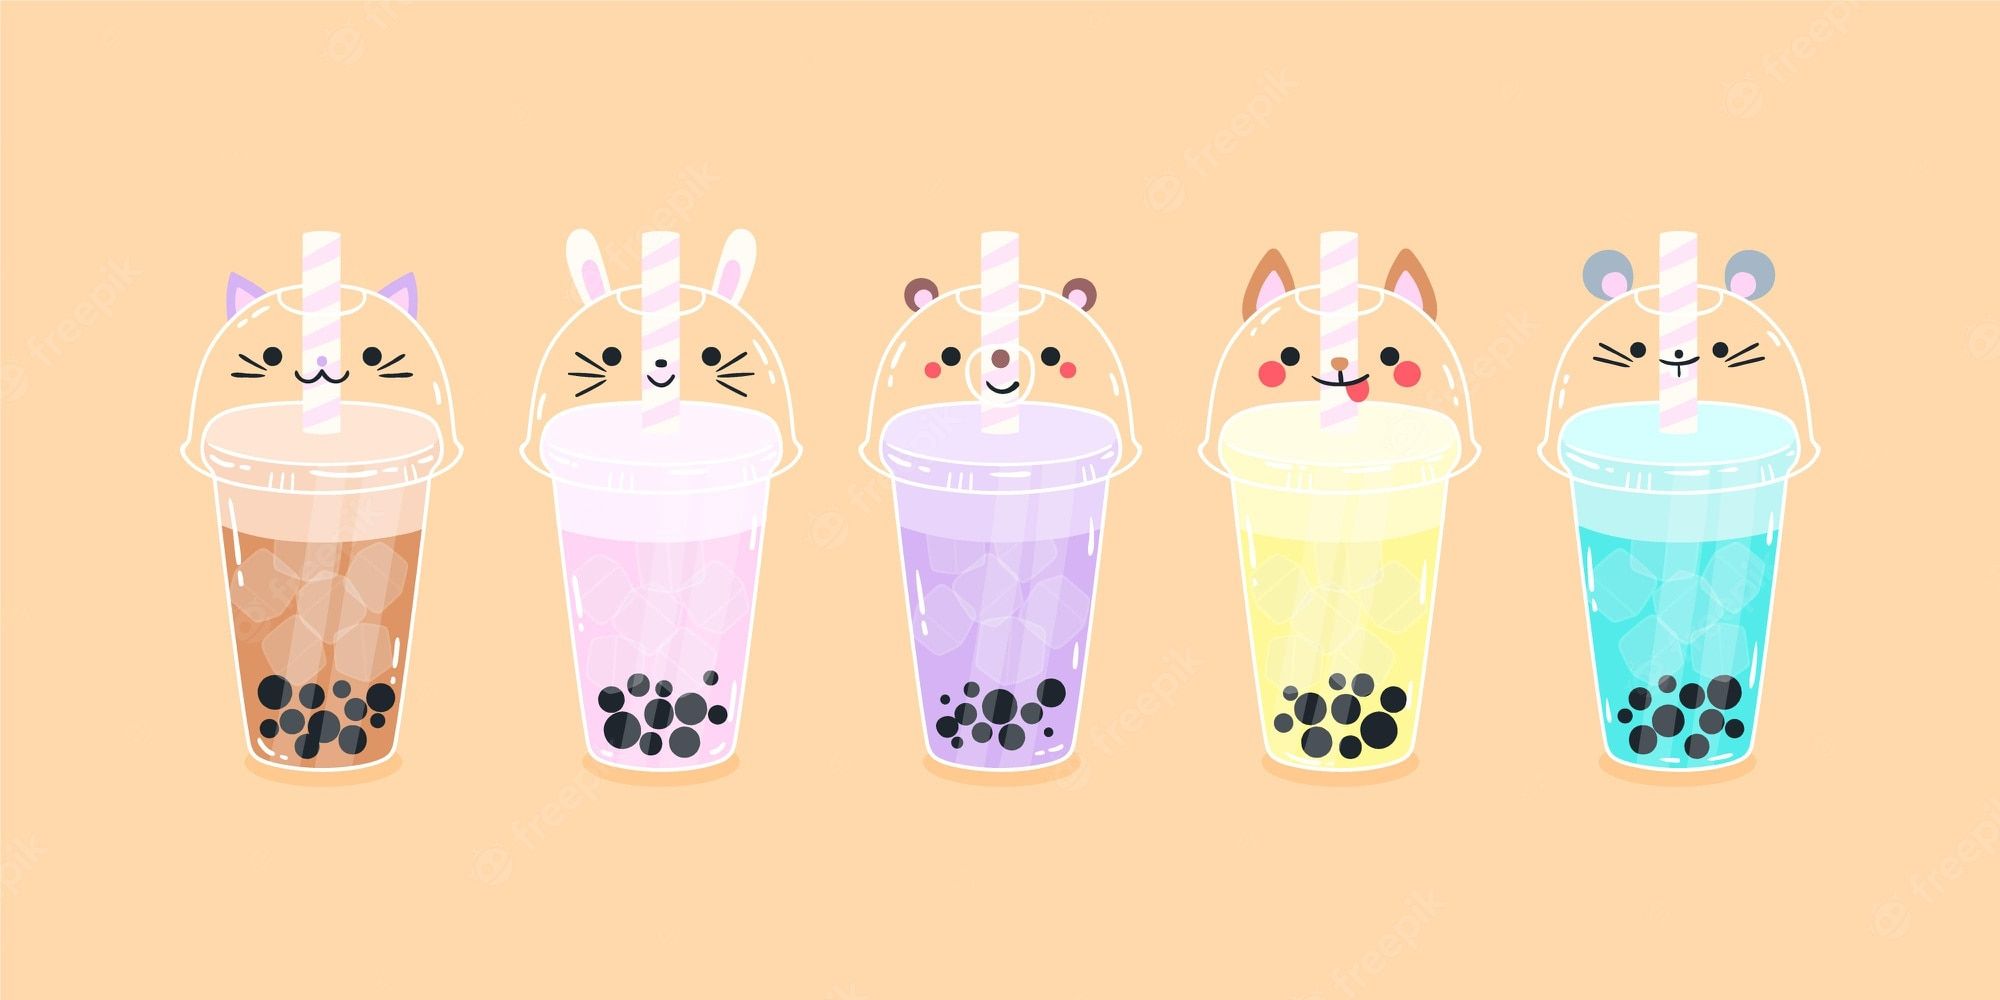 Boba tea with cute cat and dog illustrations - Boba